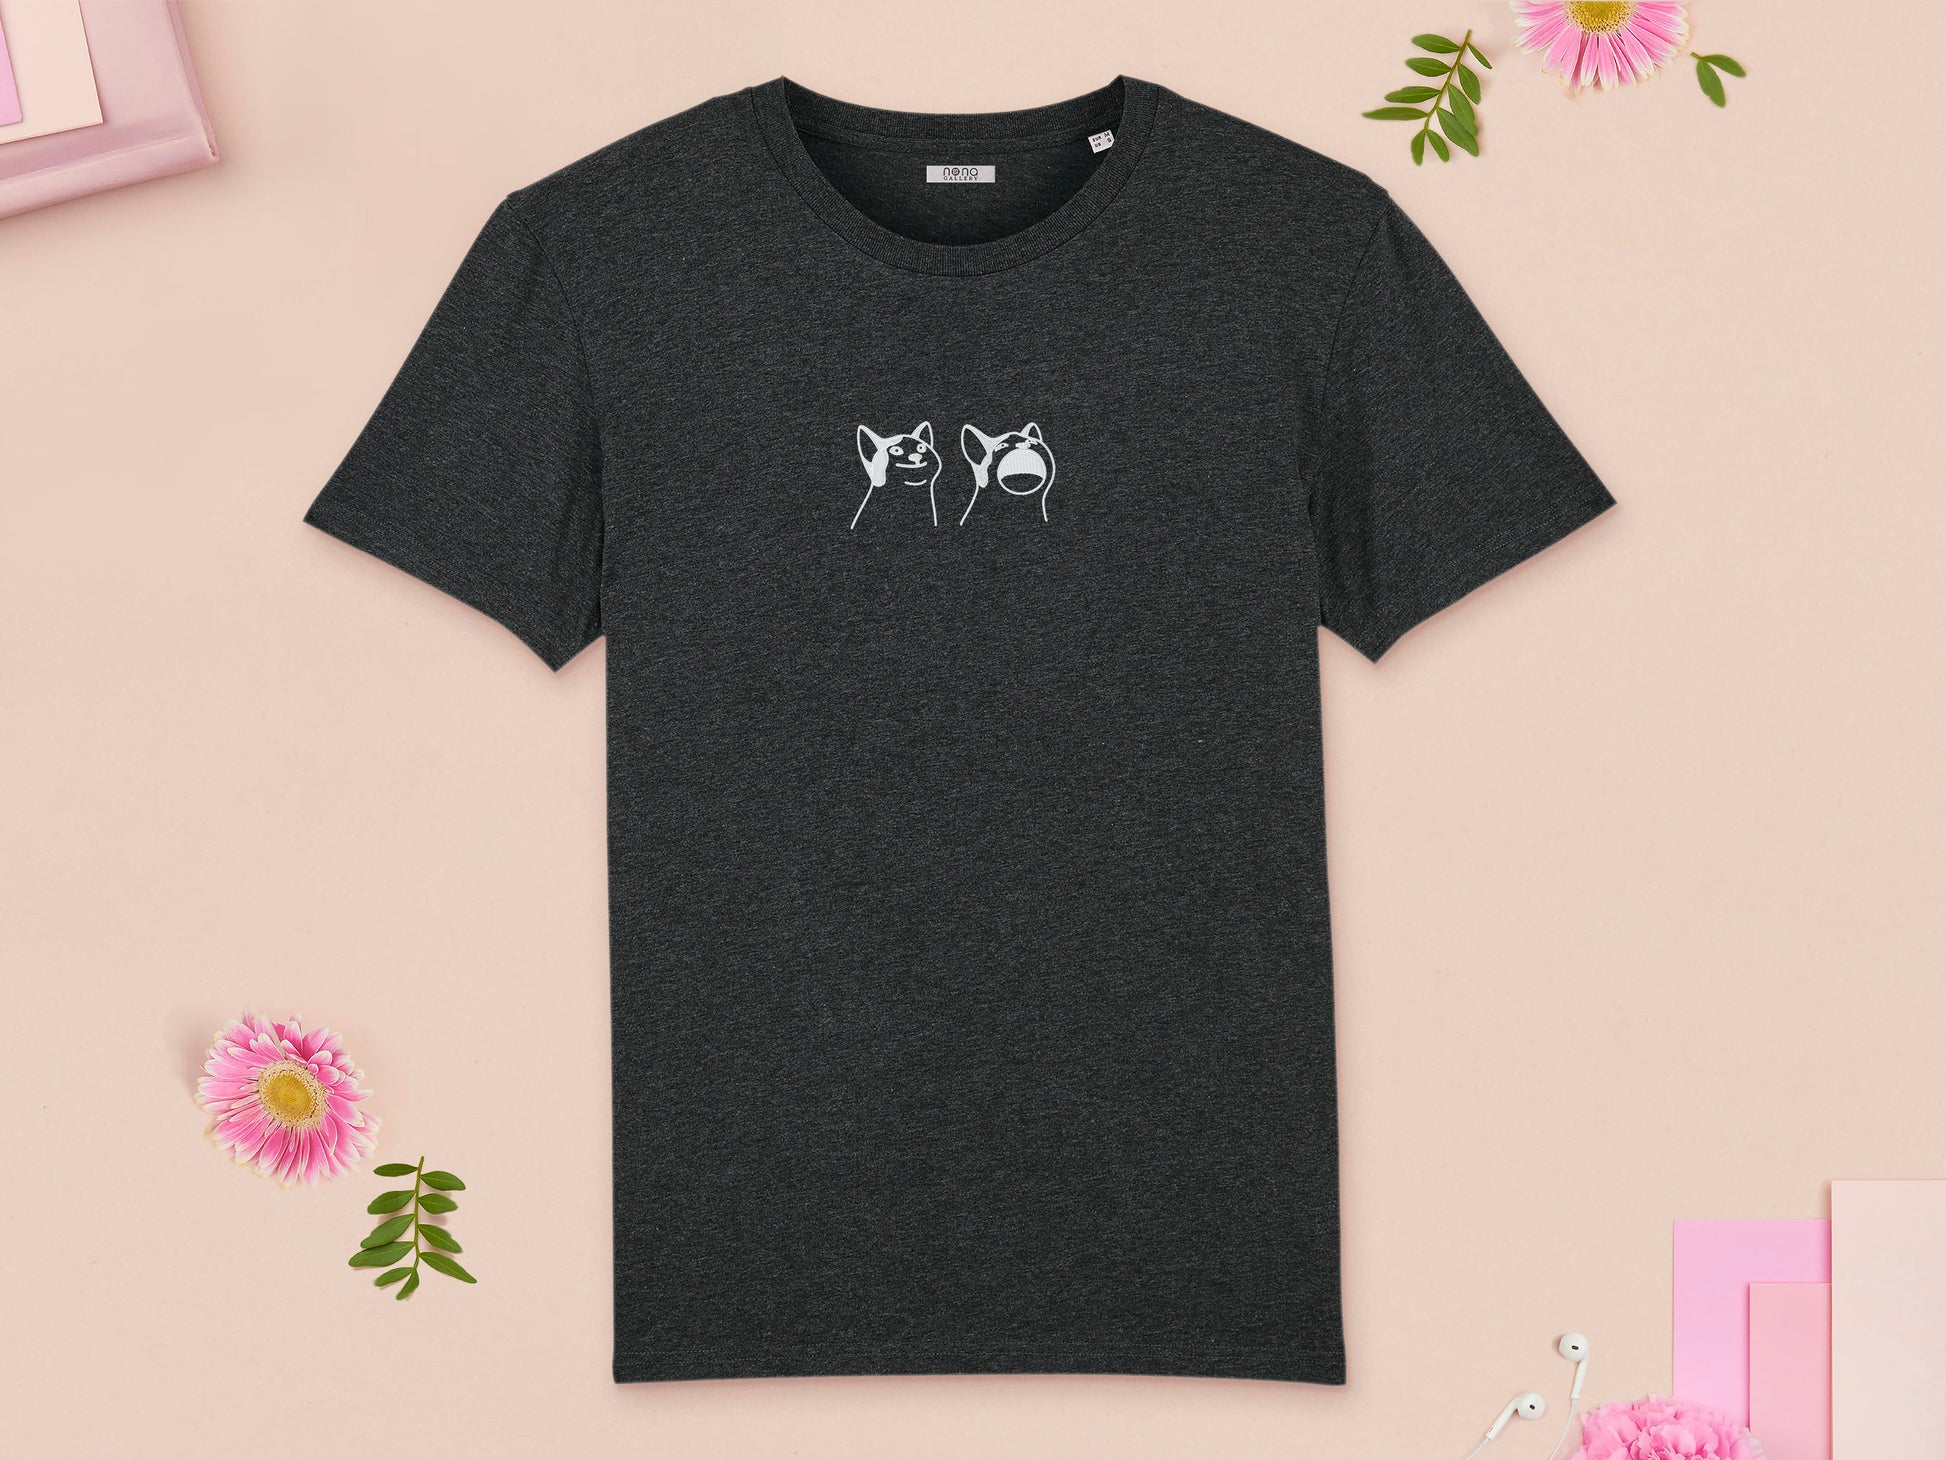 A grey  crew neck short sleeve t-shirt, with an embroidered white thread design of a cute popcat the cat meme reaction twitch emote